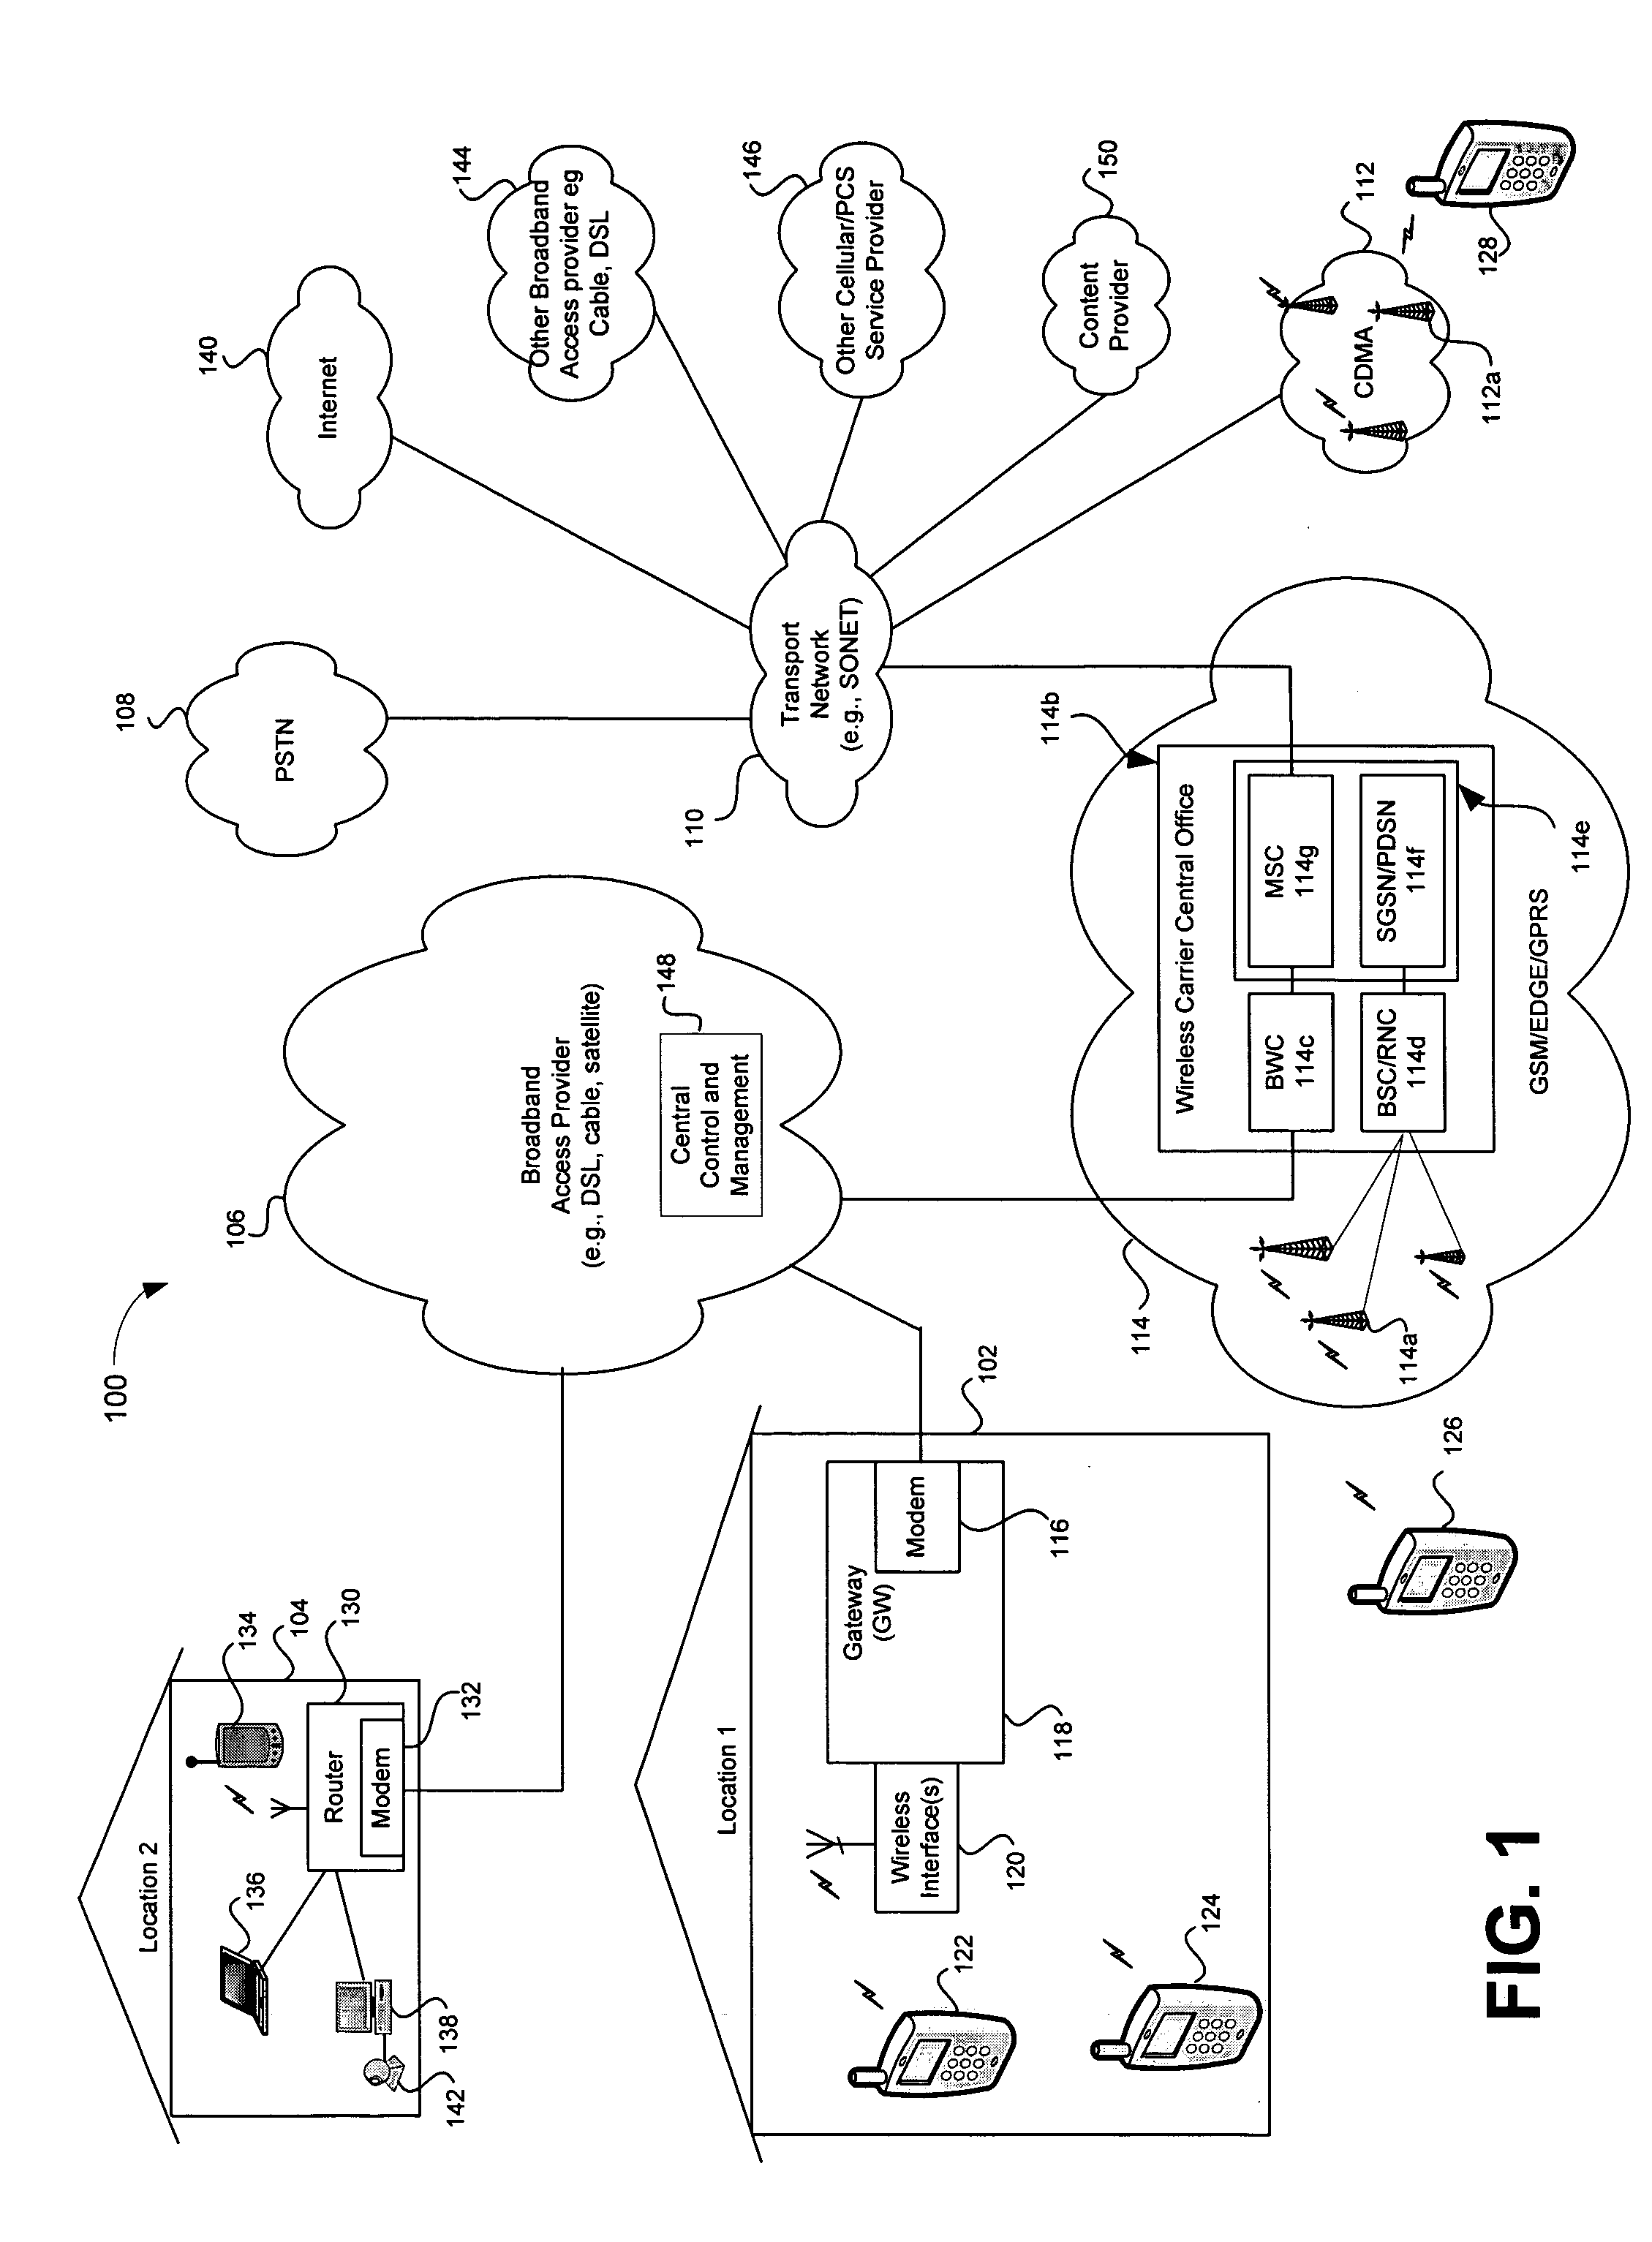 Handling of multimedia call sessions and attachments using multi-network simulcasting